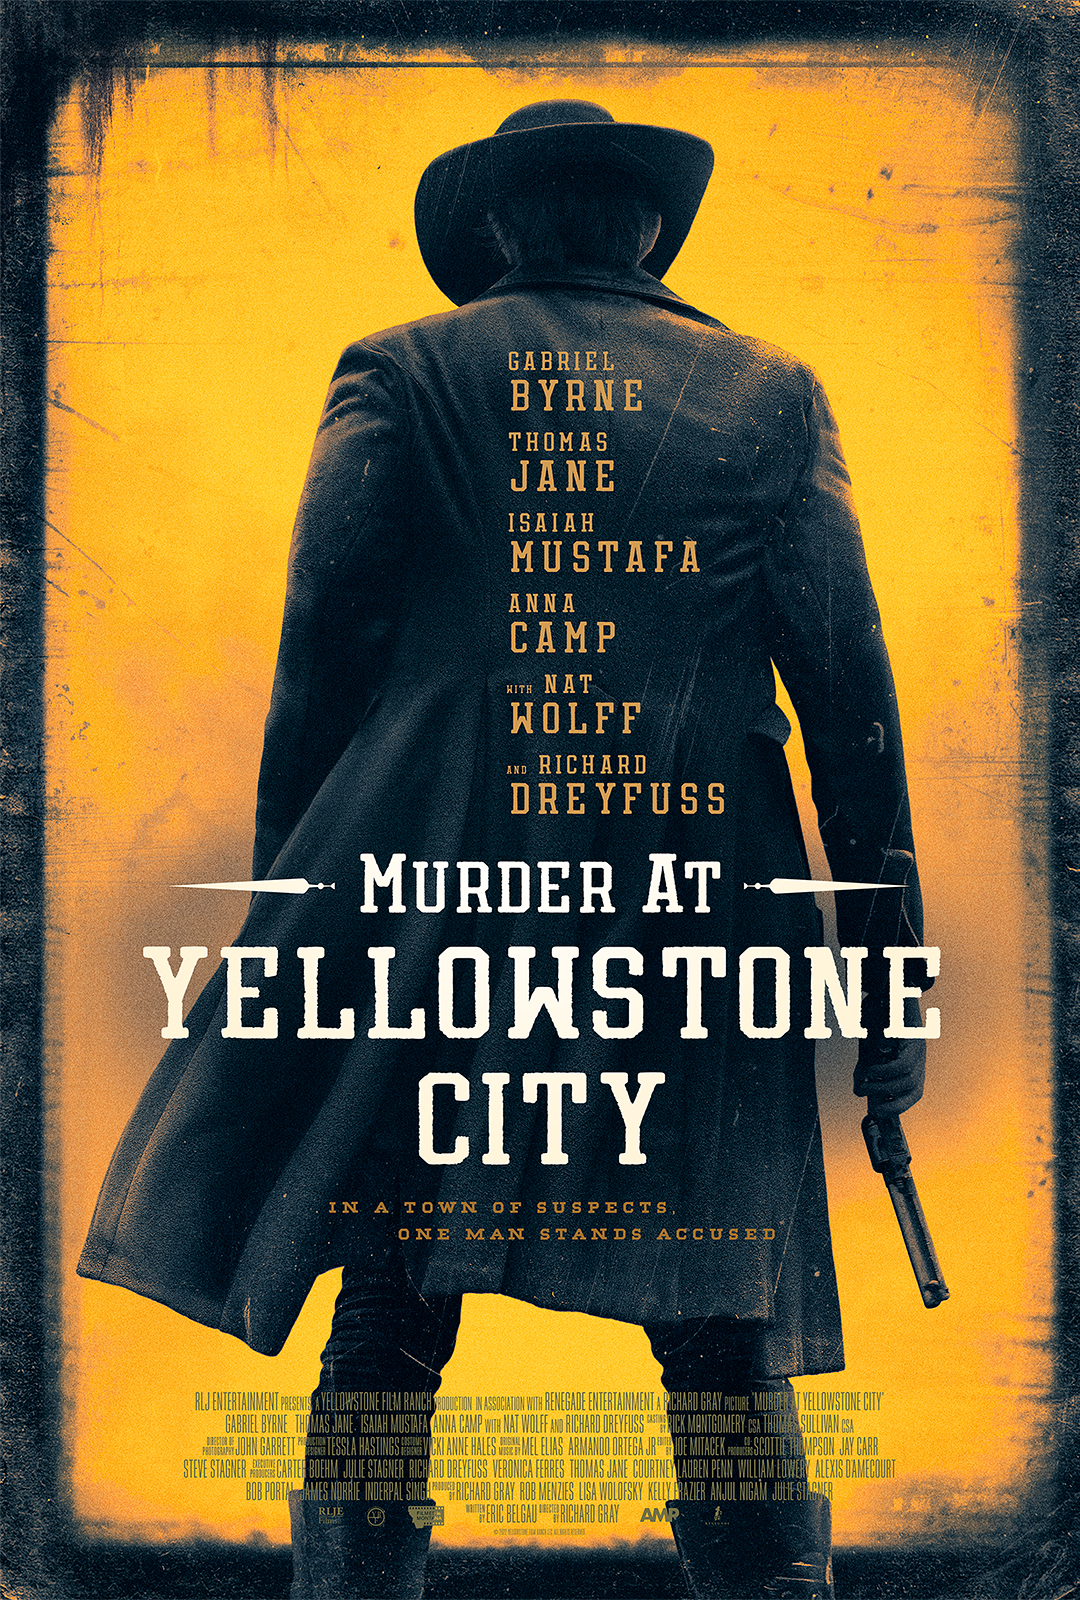 Regarder Murder at Yellowstone City en streaming complet